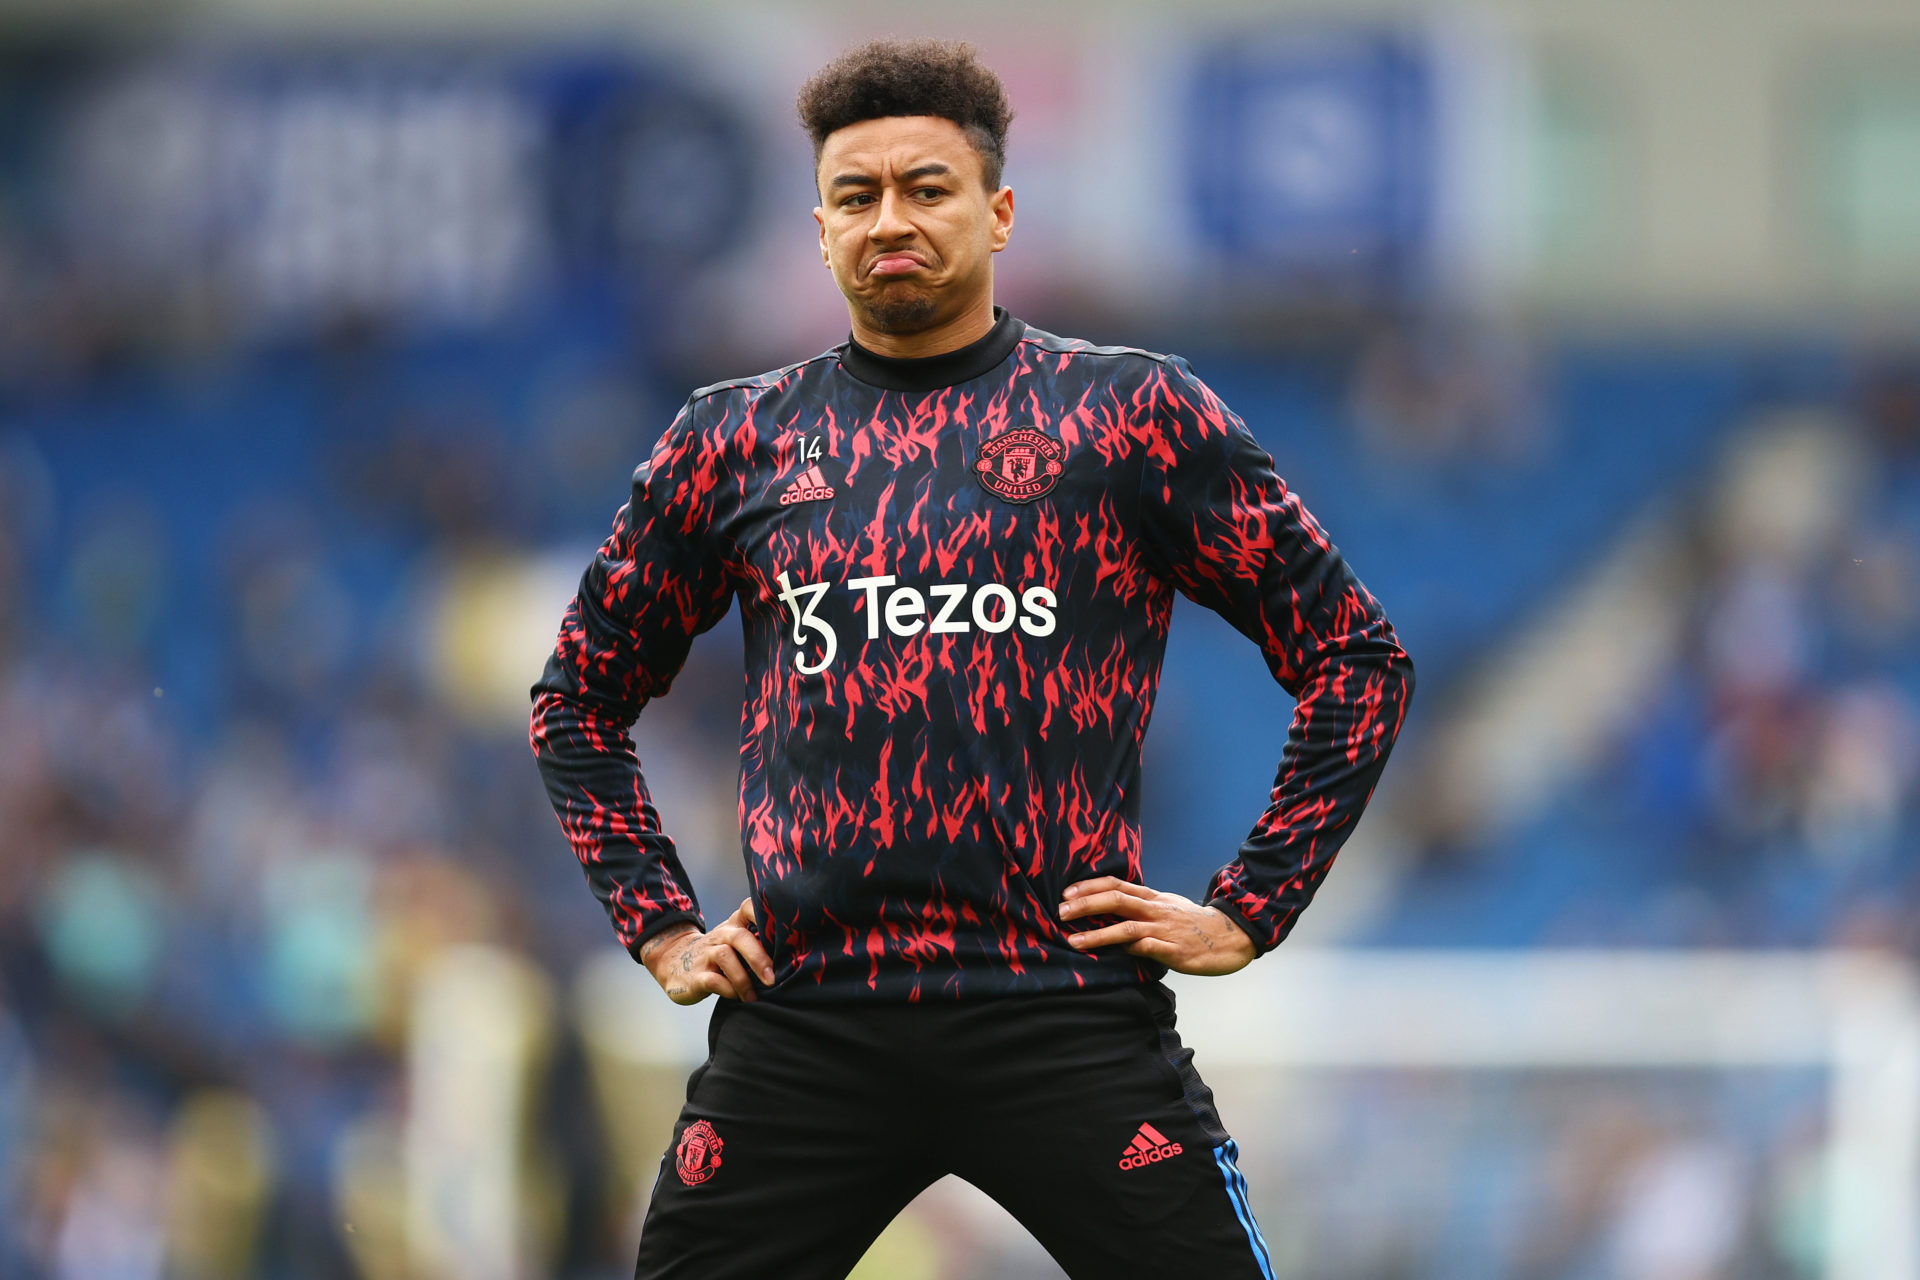 West Ham United are allegedly in ongoing talks to sign Jesse Lingard